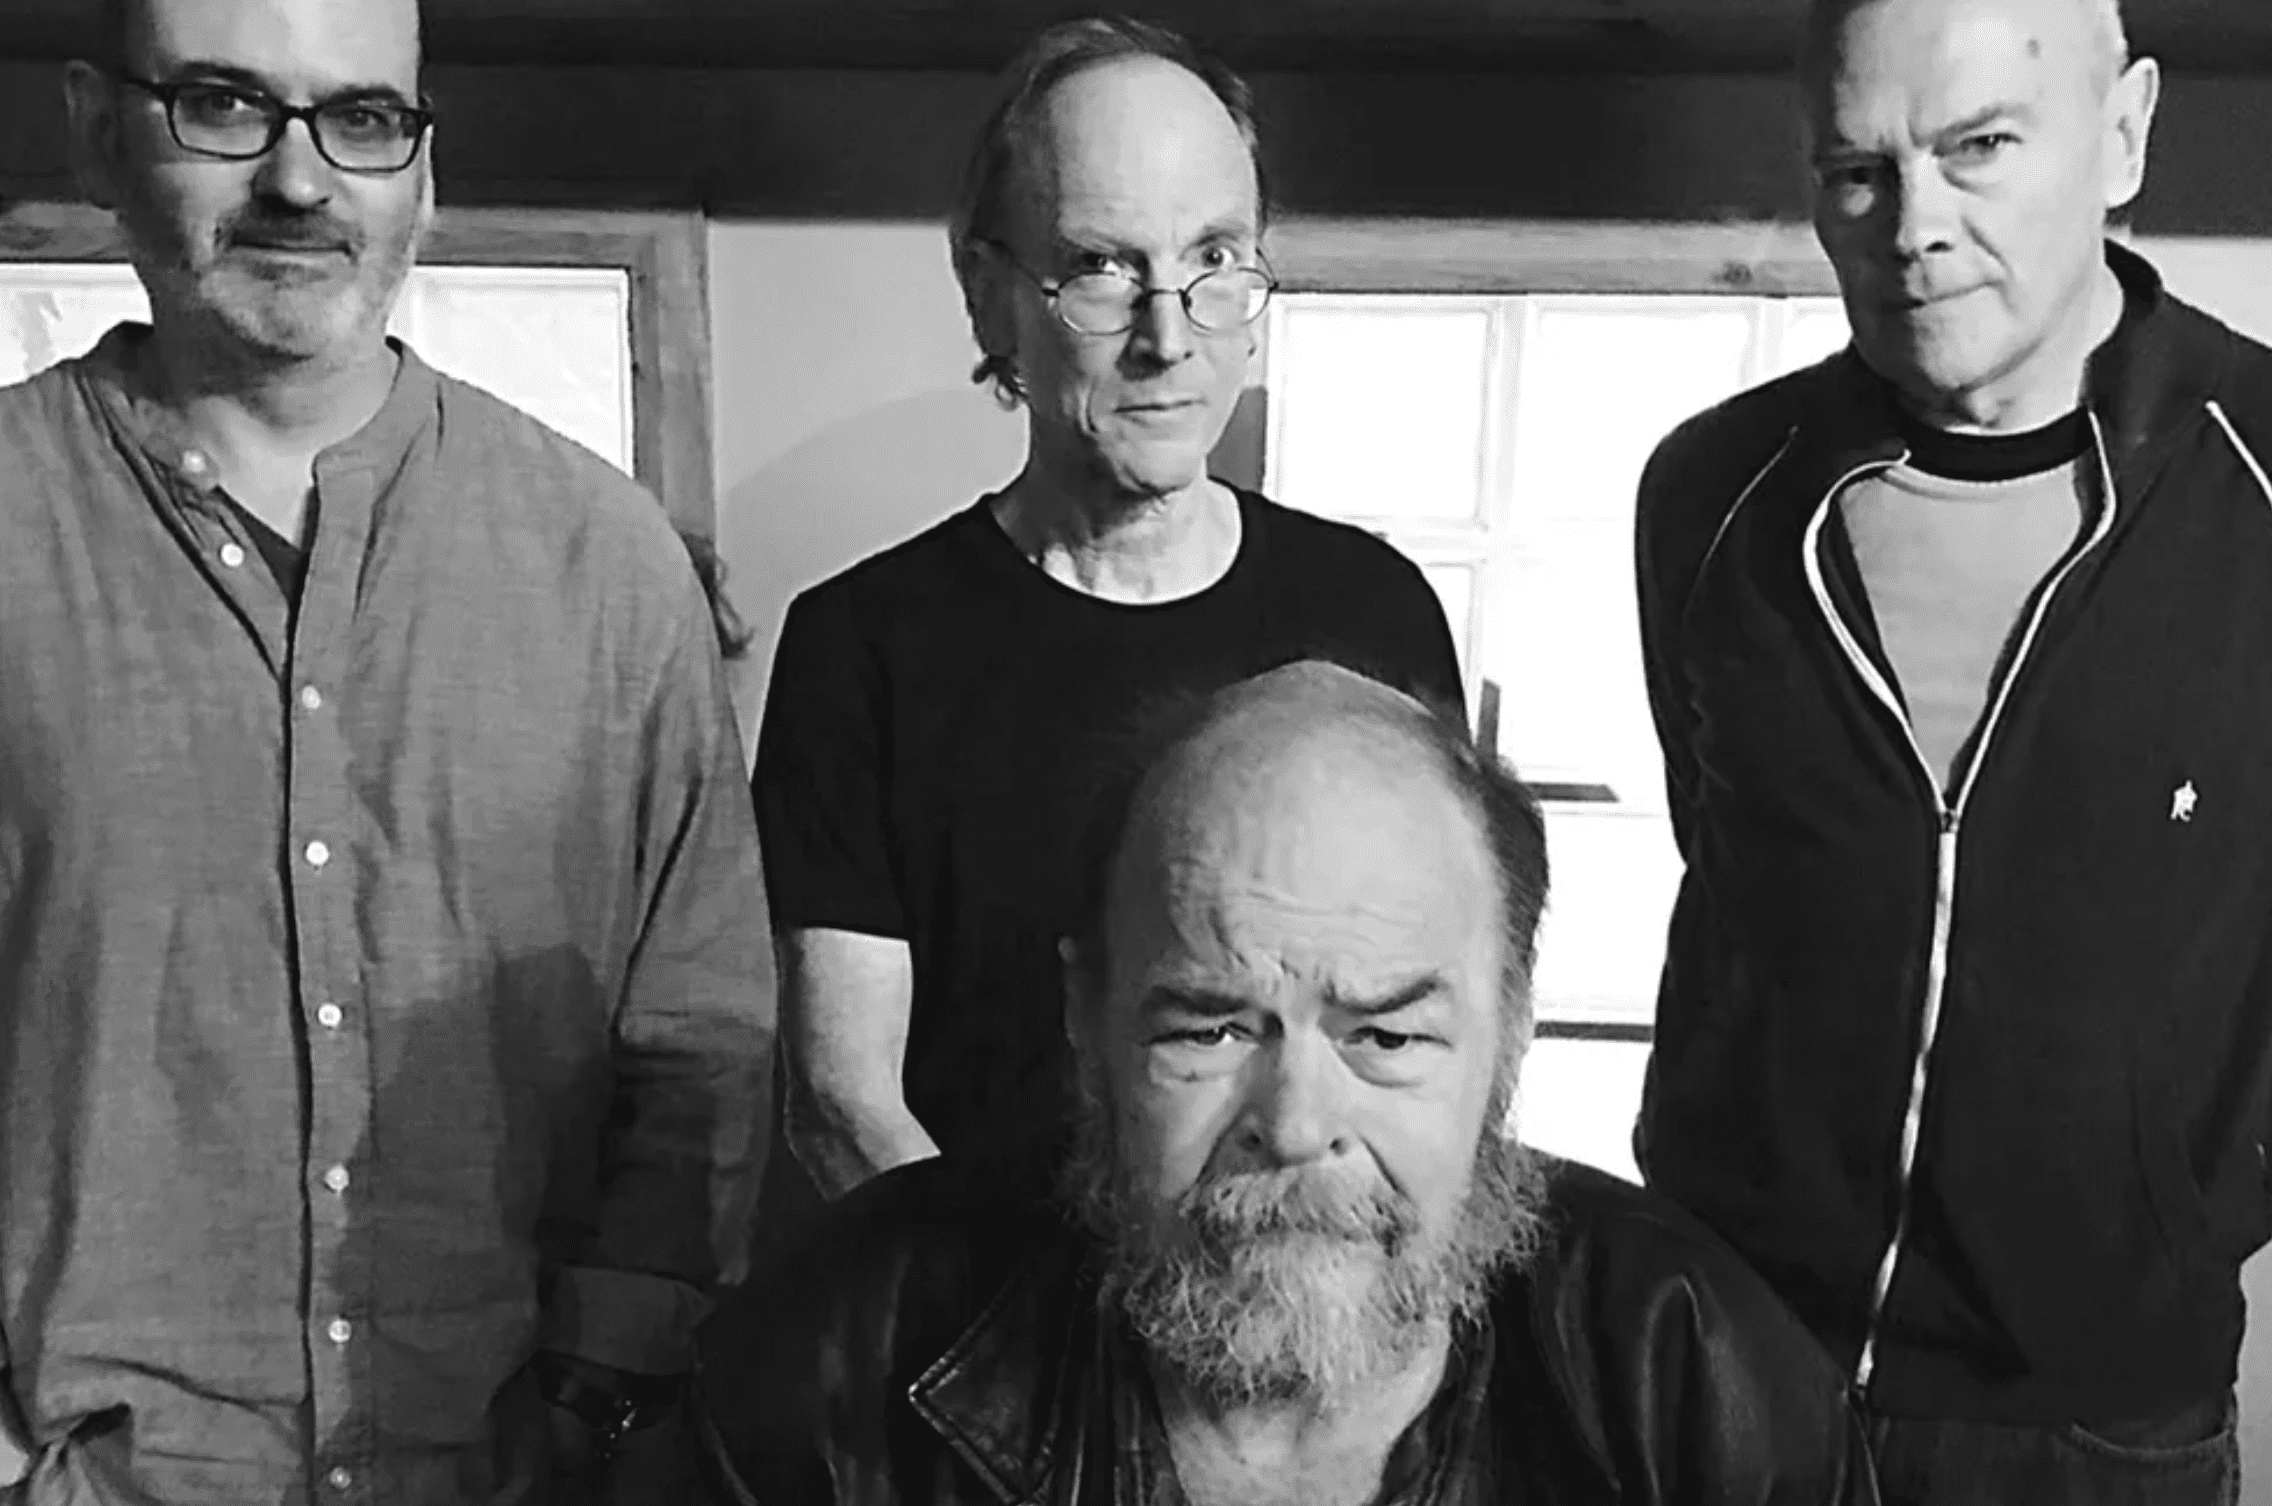 Pere Ubu ‘Comes Alive’ on Their New, Live Album